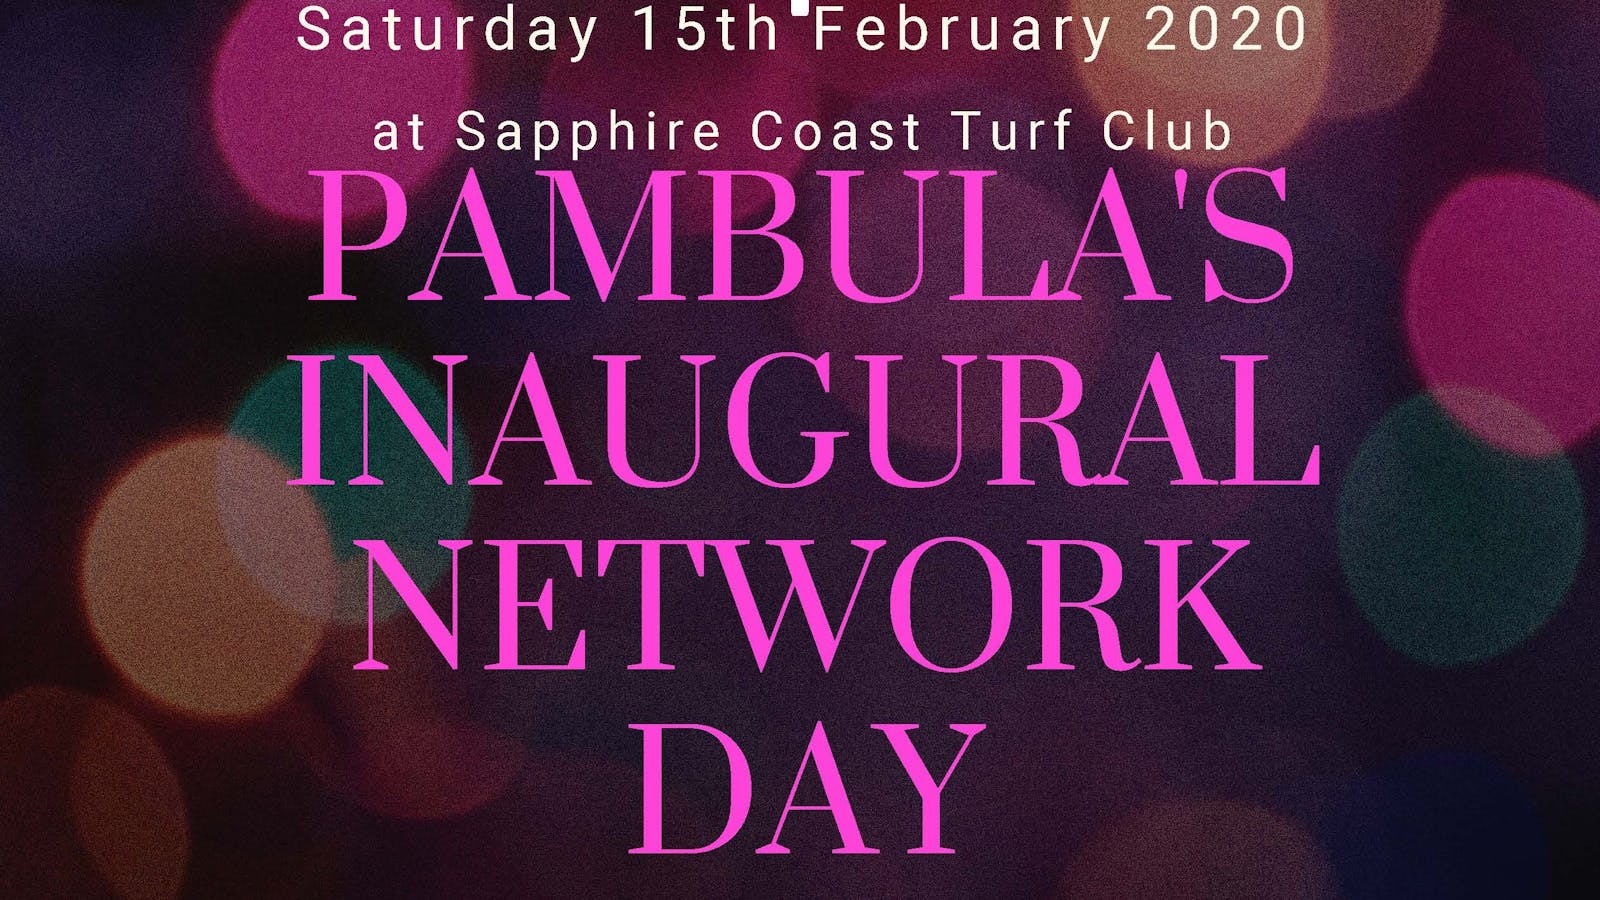 Image for Visit Pambula Network Day